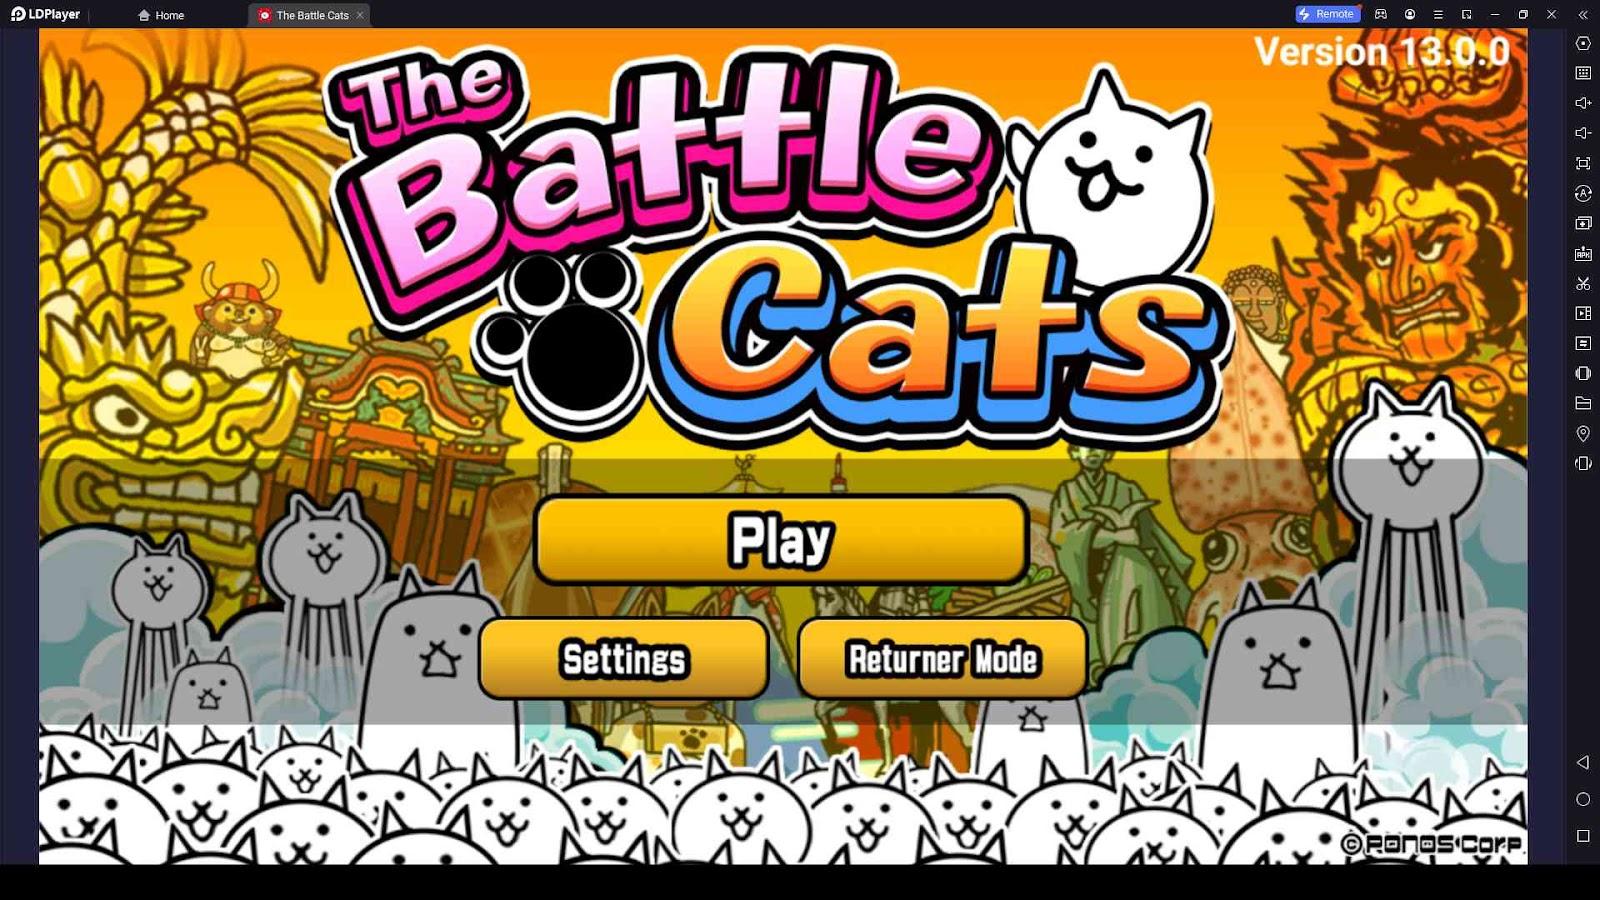 Battle Cats Codes Guide